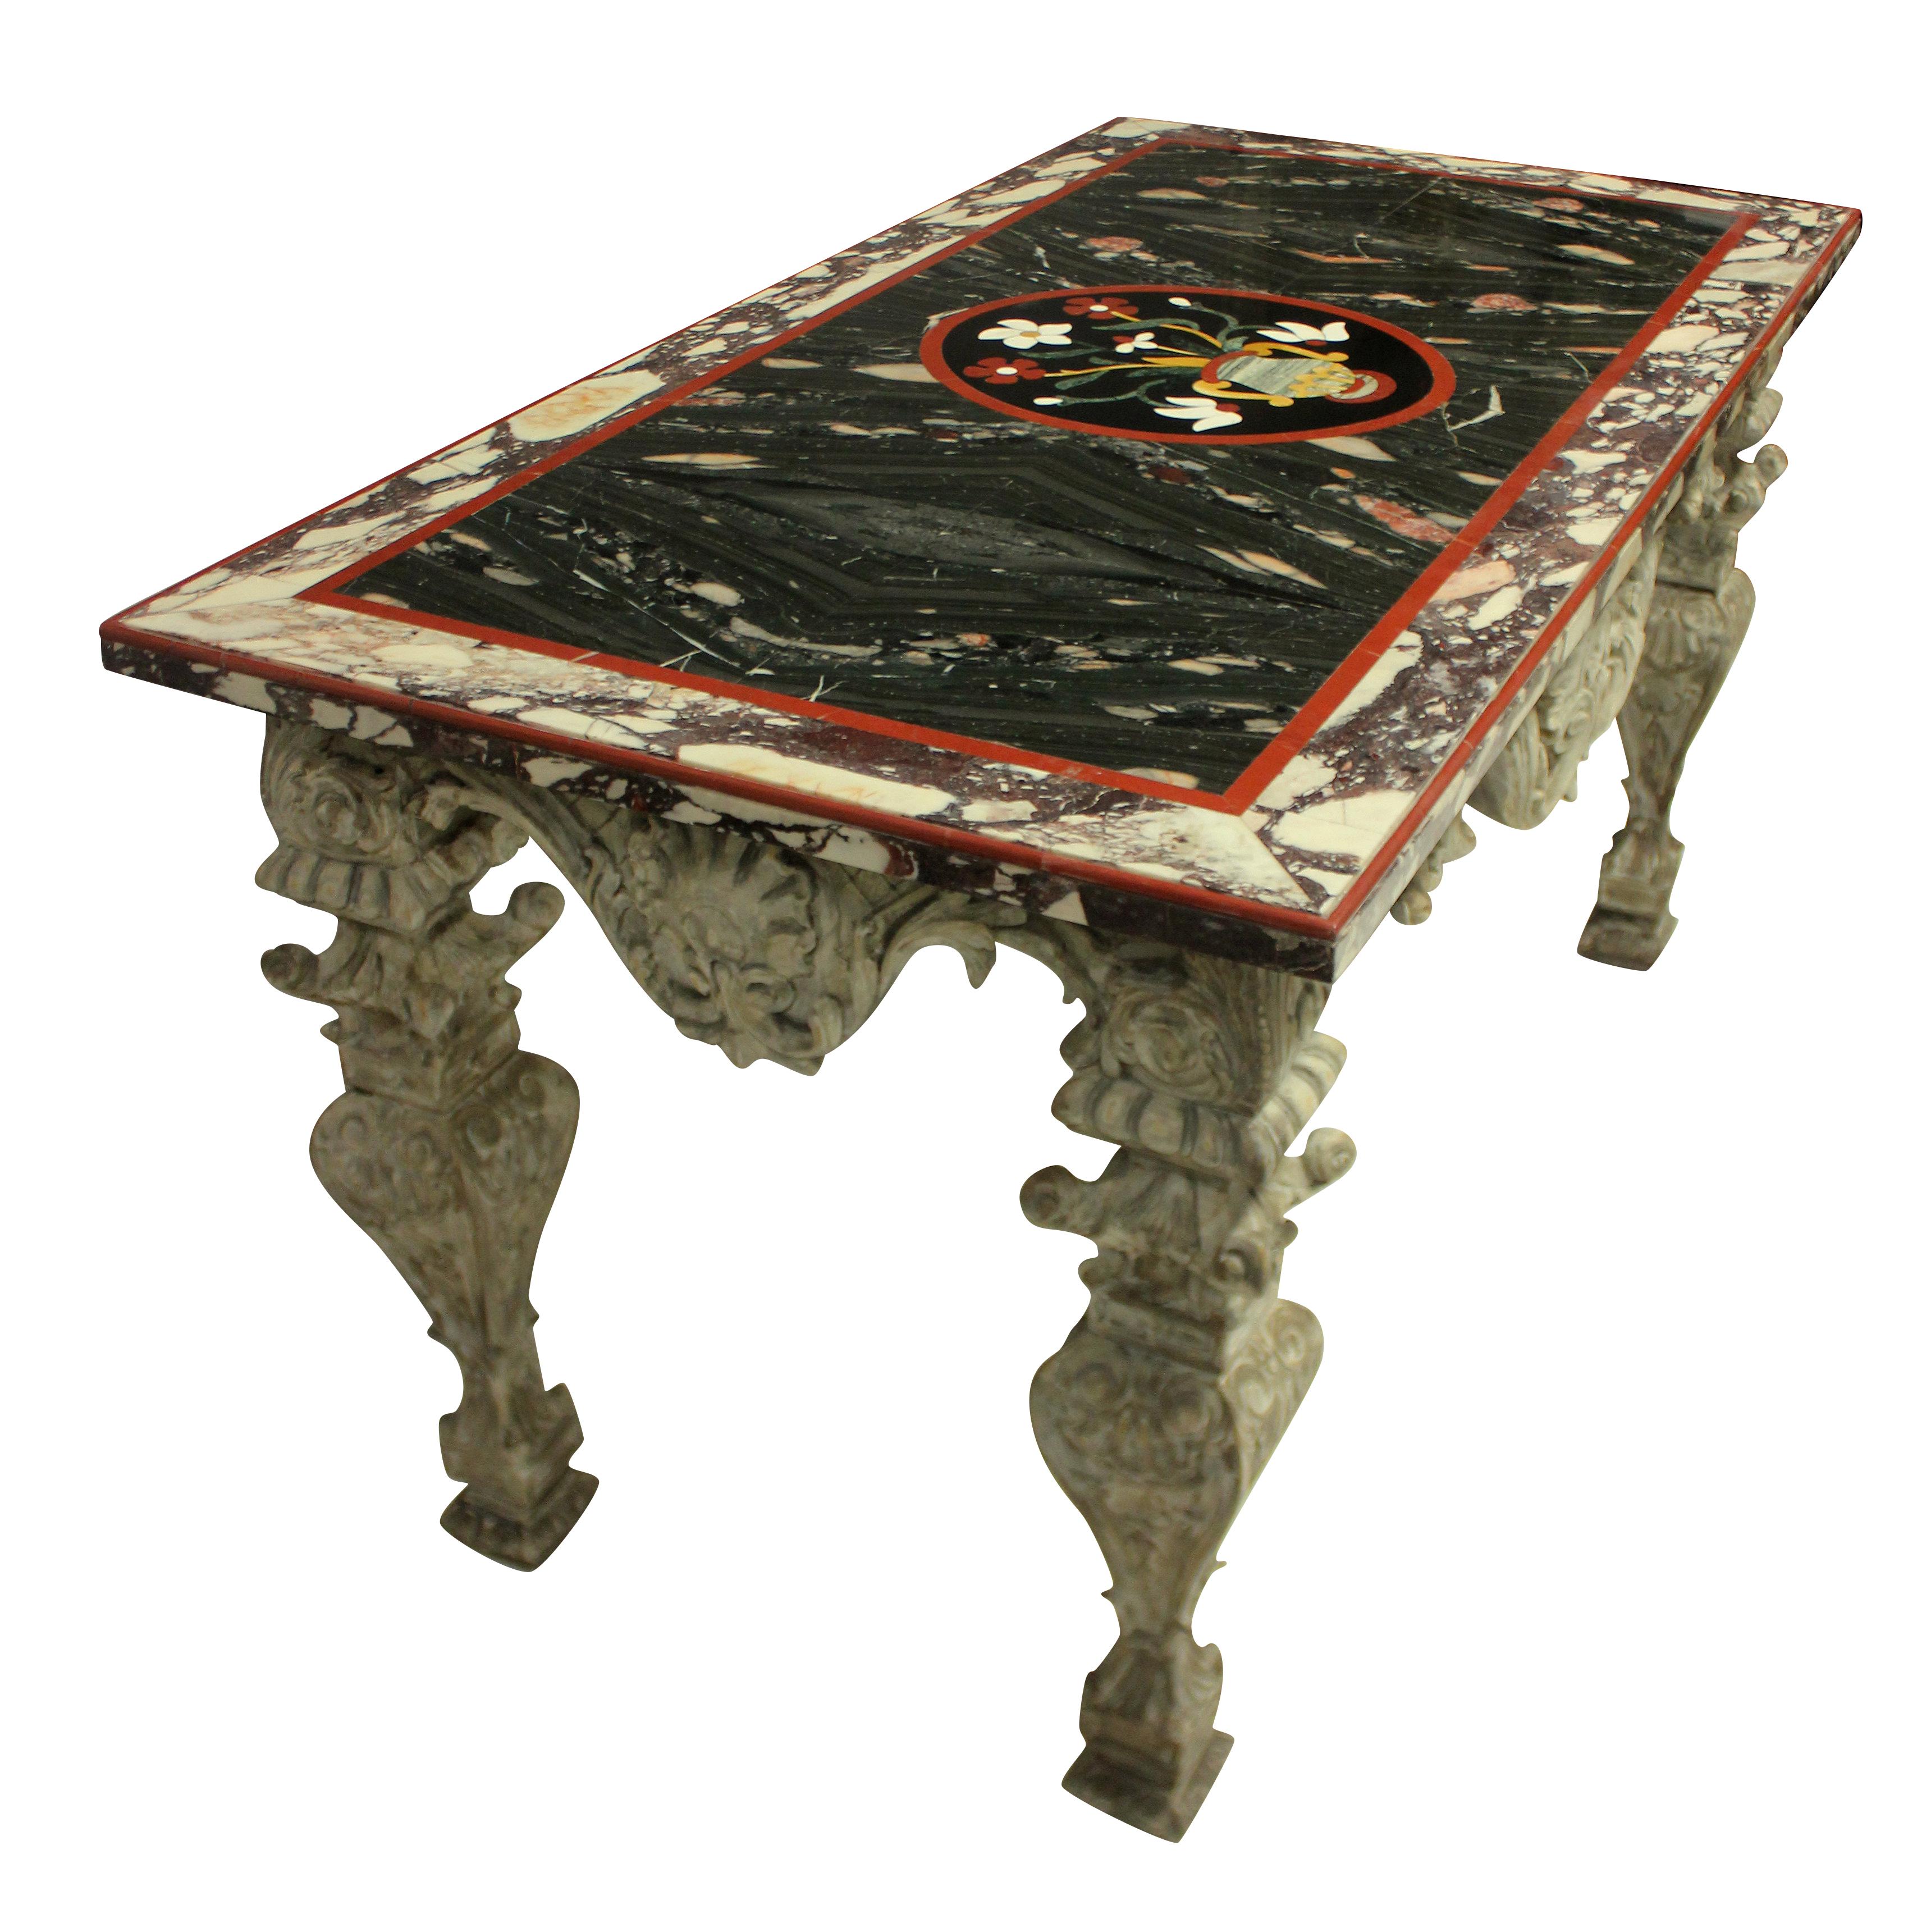 An Italian Baroque heavily carved and distressed painted walnut center table. With shell and acanthus detailing throughout, supporting a Pietra Dura marble top. The top in various marbles and hardstones, with a shaped carnelian edge, with a central